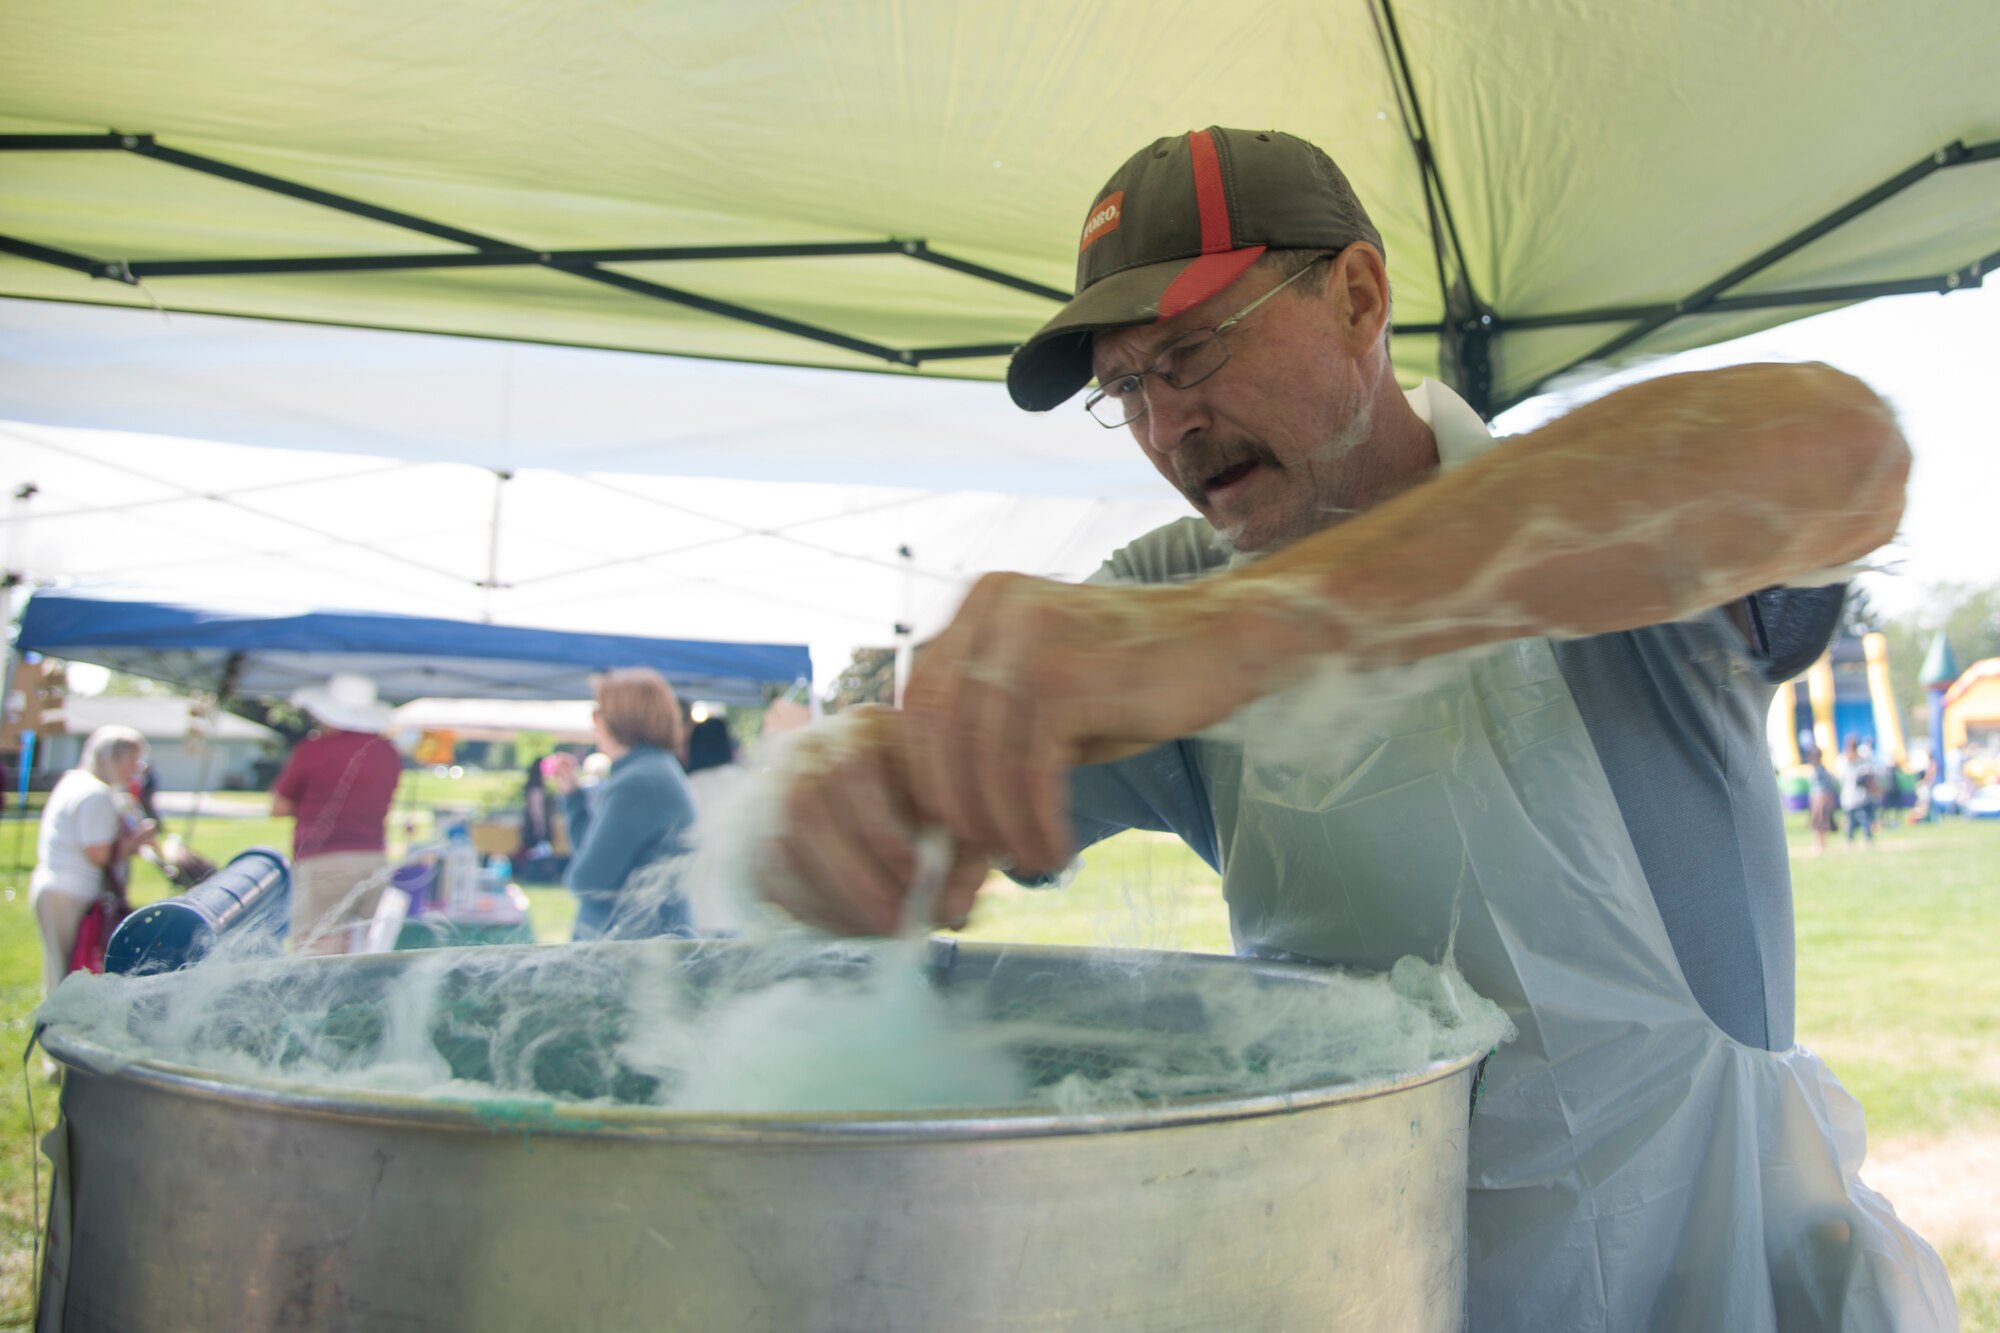 A volunteer spins cotton candy for base children at the 2018 Fairchild Food Truck Festival, Aug. 28, 2018, at Fairchild Air Force Base, Washington. Festival attendees enjoyed free food, rides and could win prizes for participation with visiting vendors. (U.S. Air Force photo/ Senior Airman Ryan Lackey)